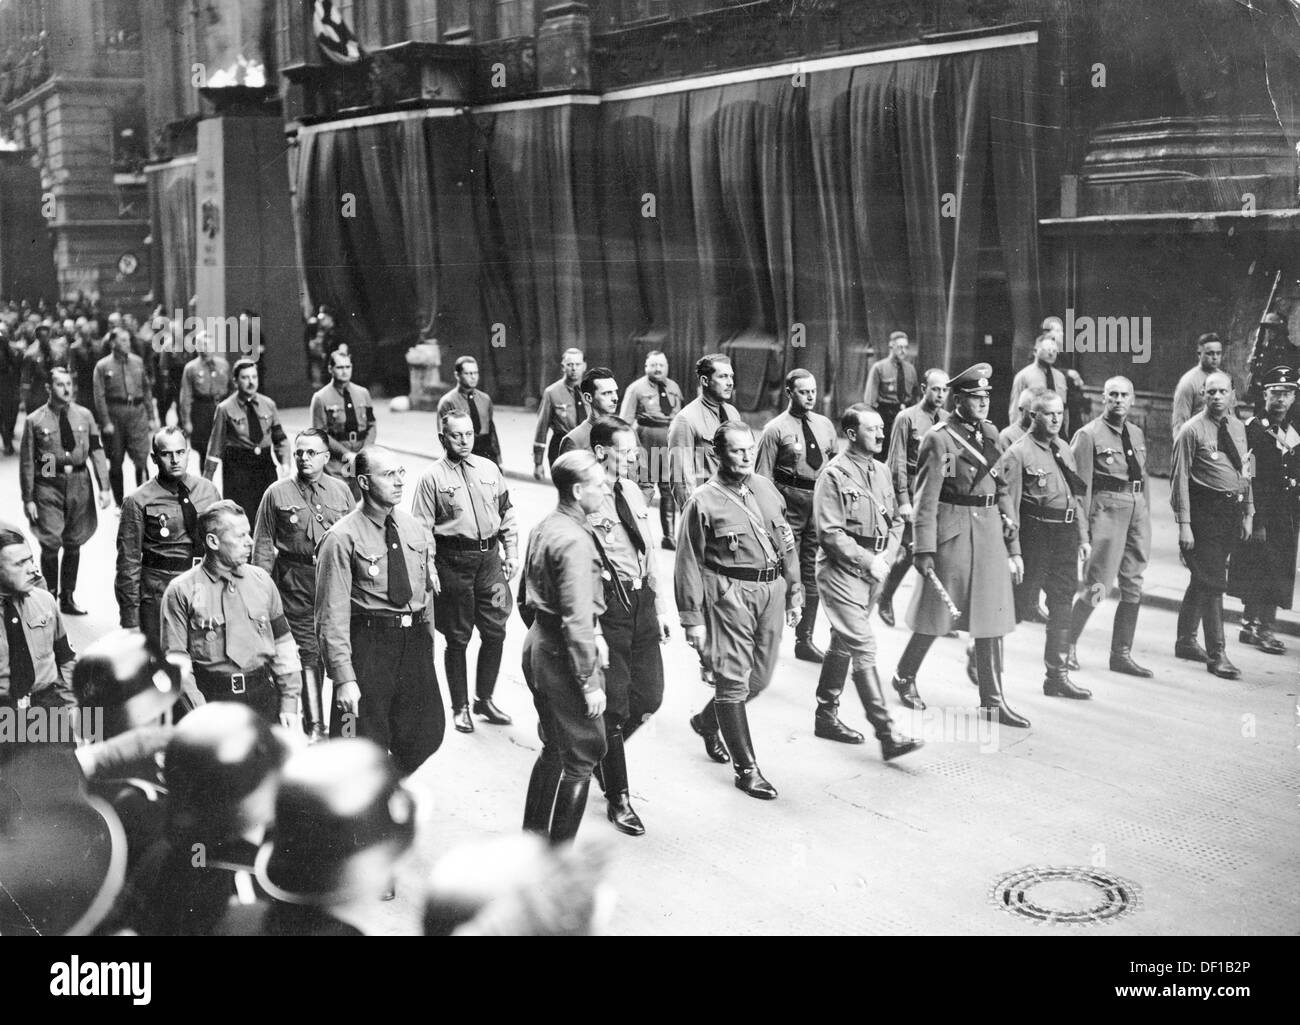 The image from the Nazi Propaganda! shows Adolf Hitler leading his supporters through Munich on a historic march on the occasion of the commemoration of the Beer Hall Putsch of 9 November 1923, on 9 November (year unknown). To Hitler's left: Hermann Göring, to Hitler's right, Minister of War Werner von Blomberg. To the very left Reichsführer SS Heinrich Himmler. Fotoarchiv für Zeitgeschichte Stock Photo